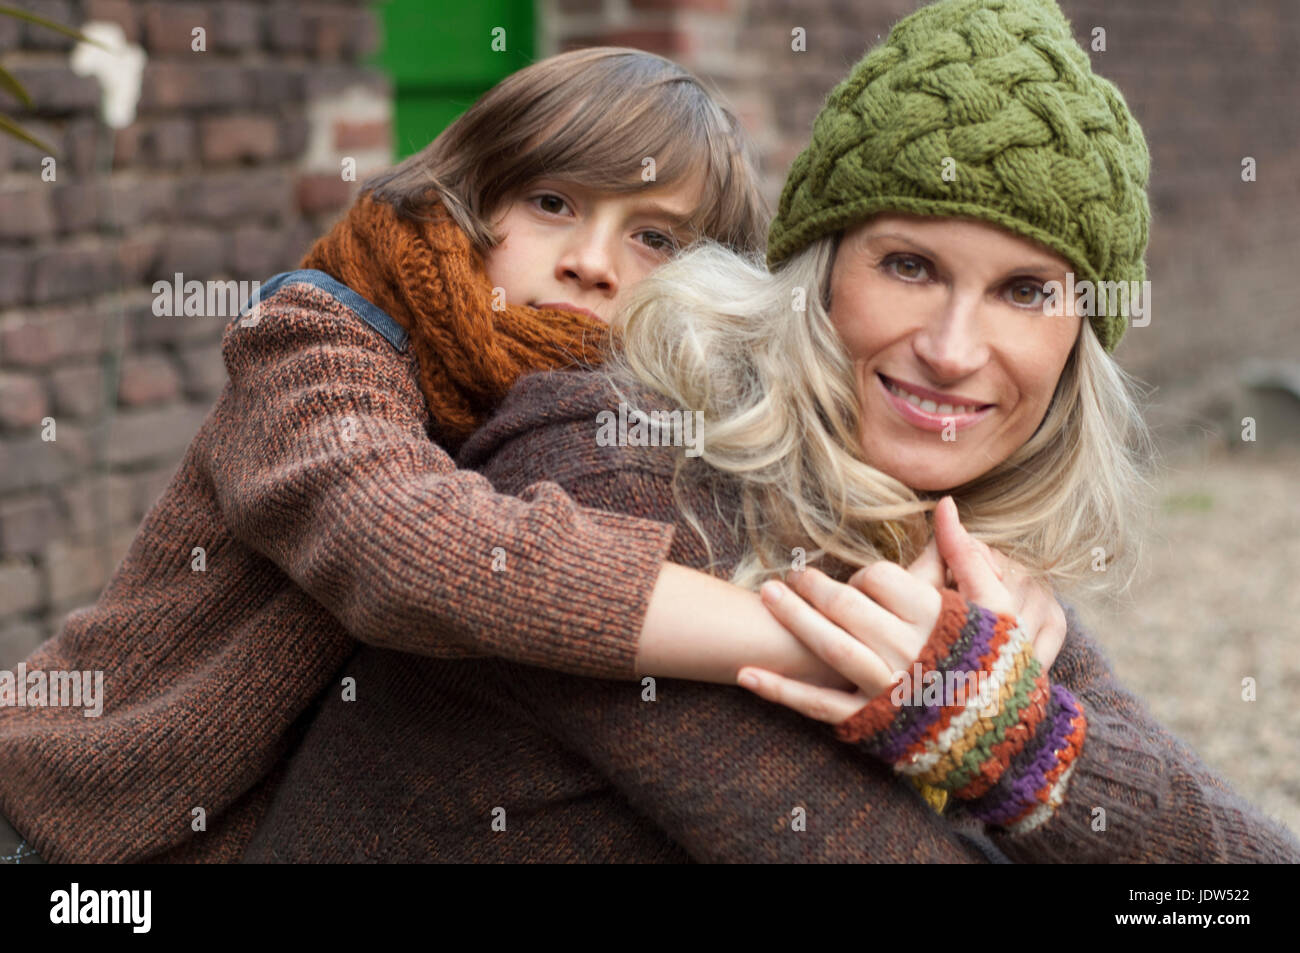 Boy embracing mother outdoors, smiling Stock Photo